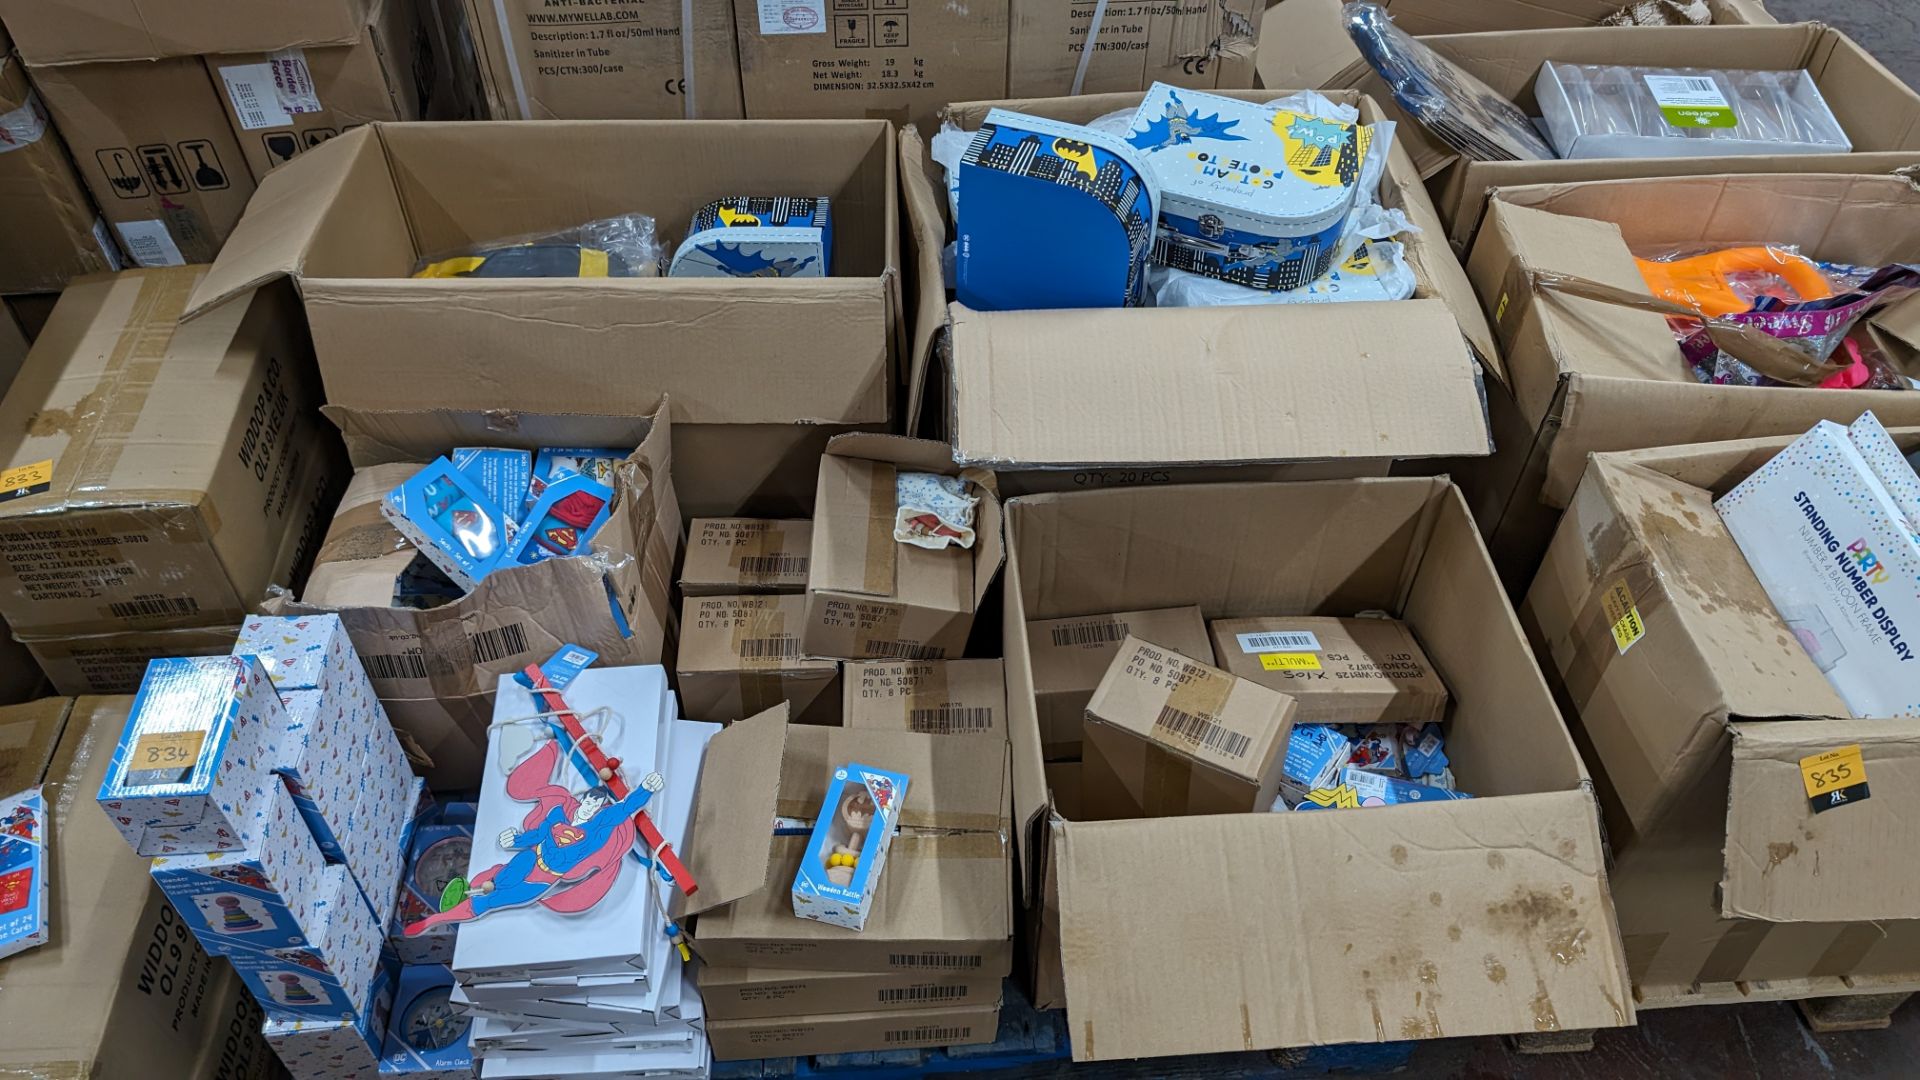 The contents of a pallet of Super Hero gifts including socks, hanging signs, alarm clocks, stacking - Image 2 of 11